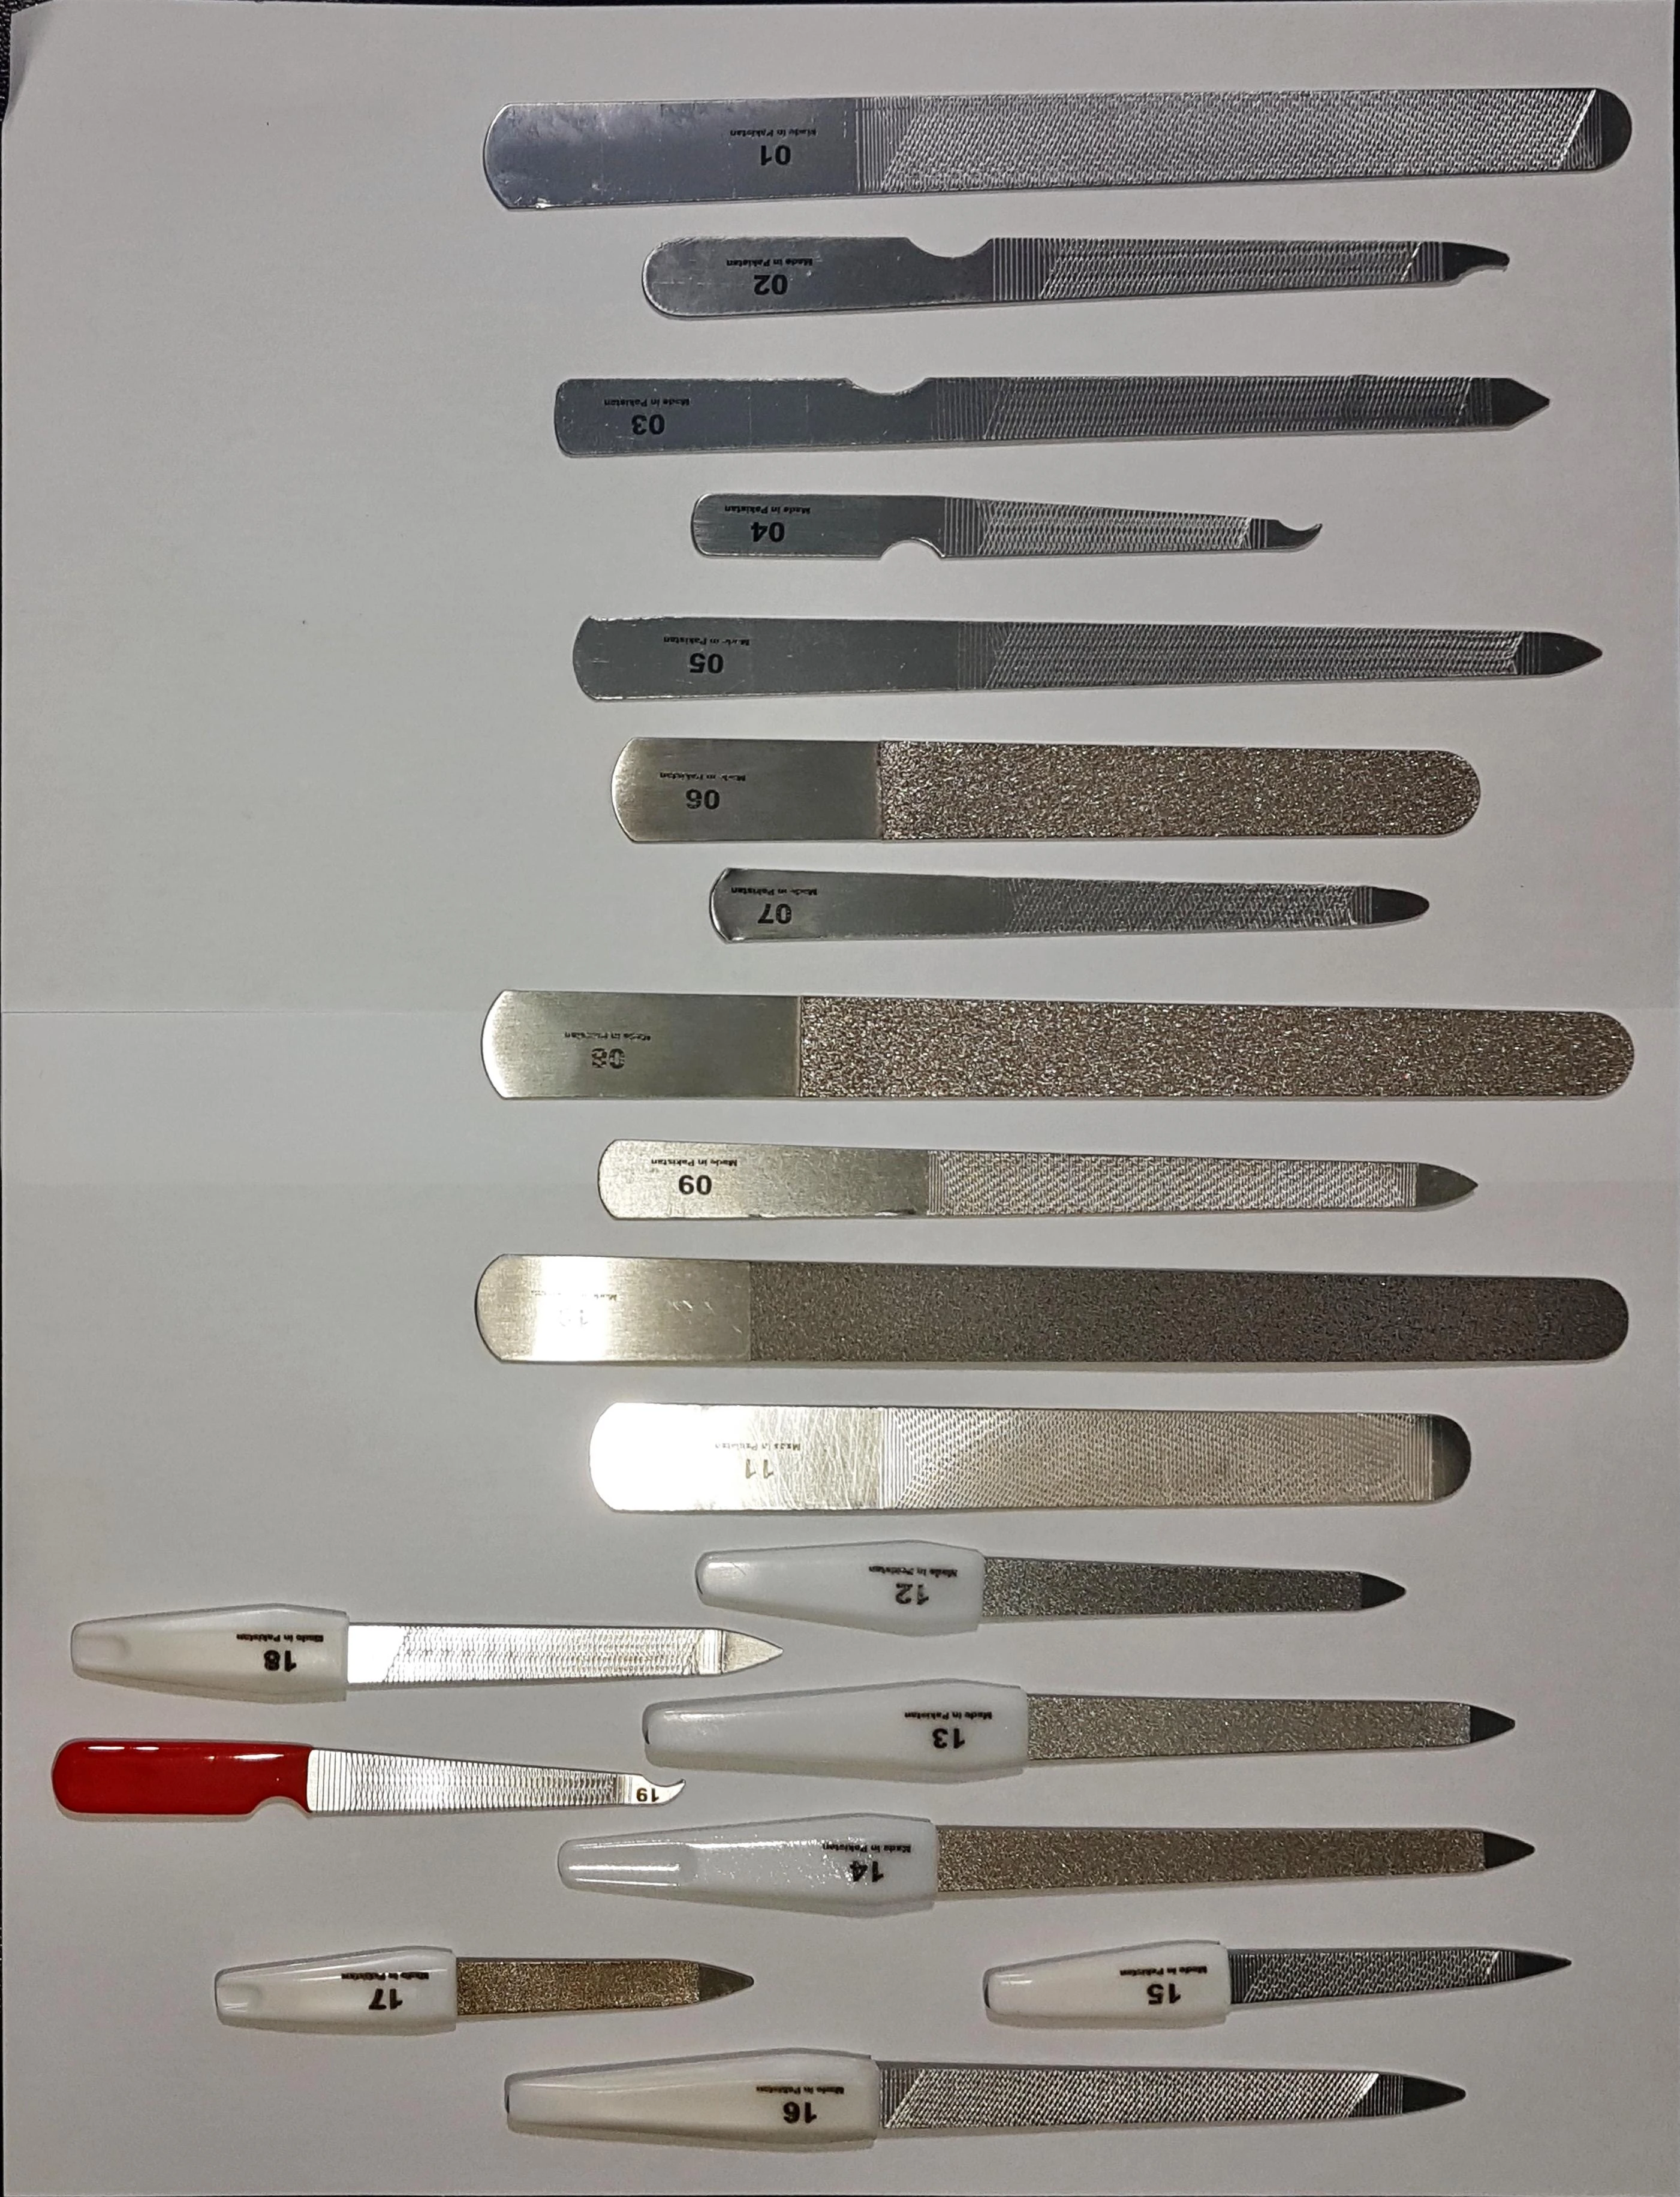 Stainless steel nail files